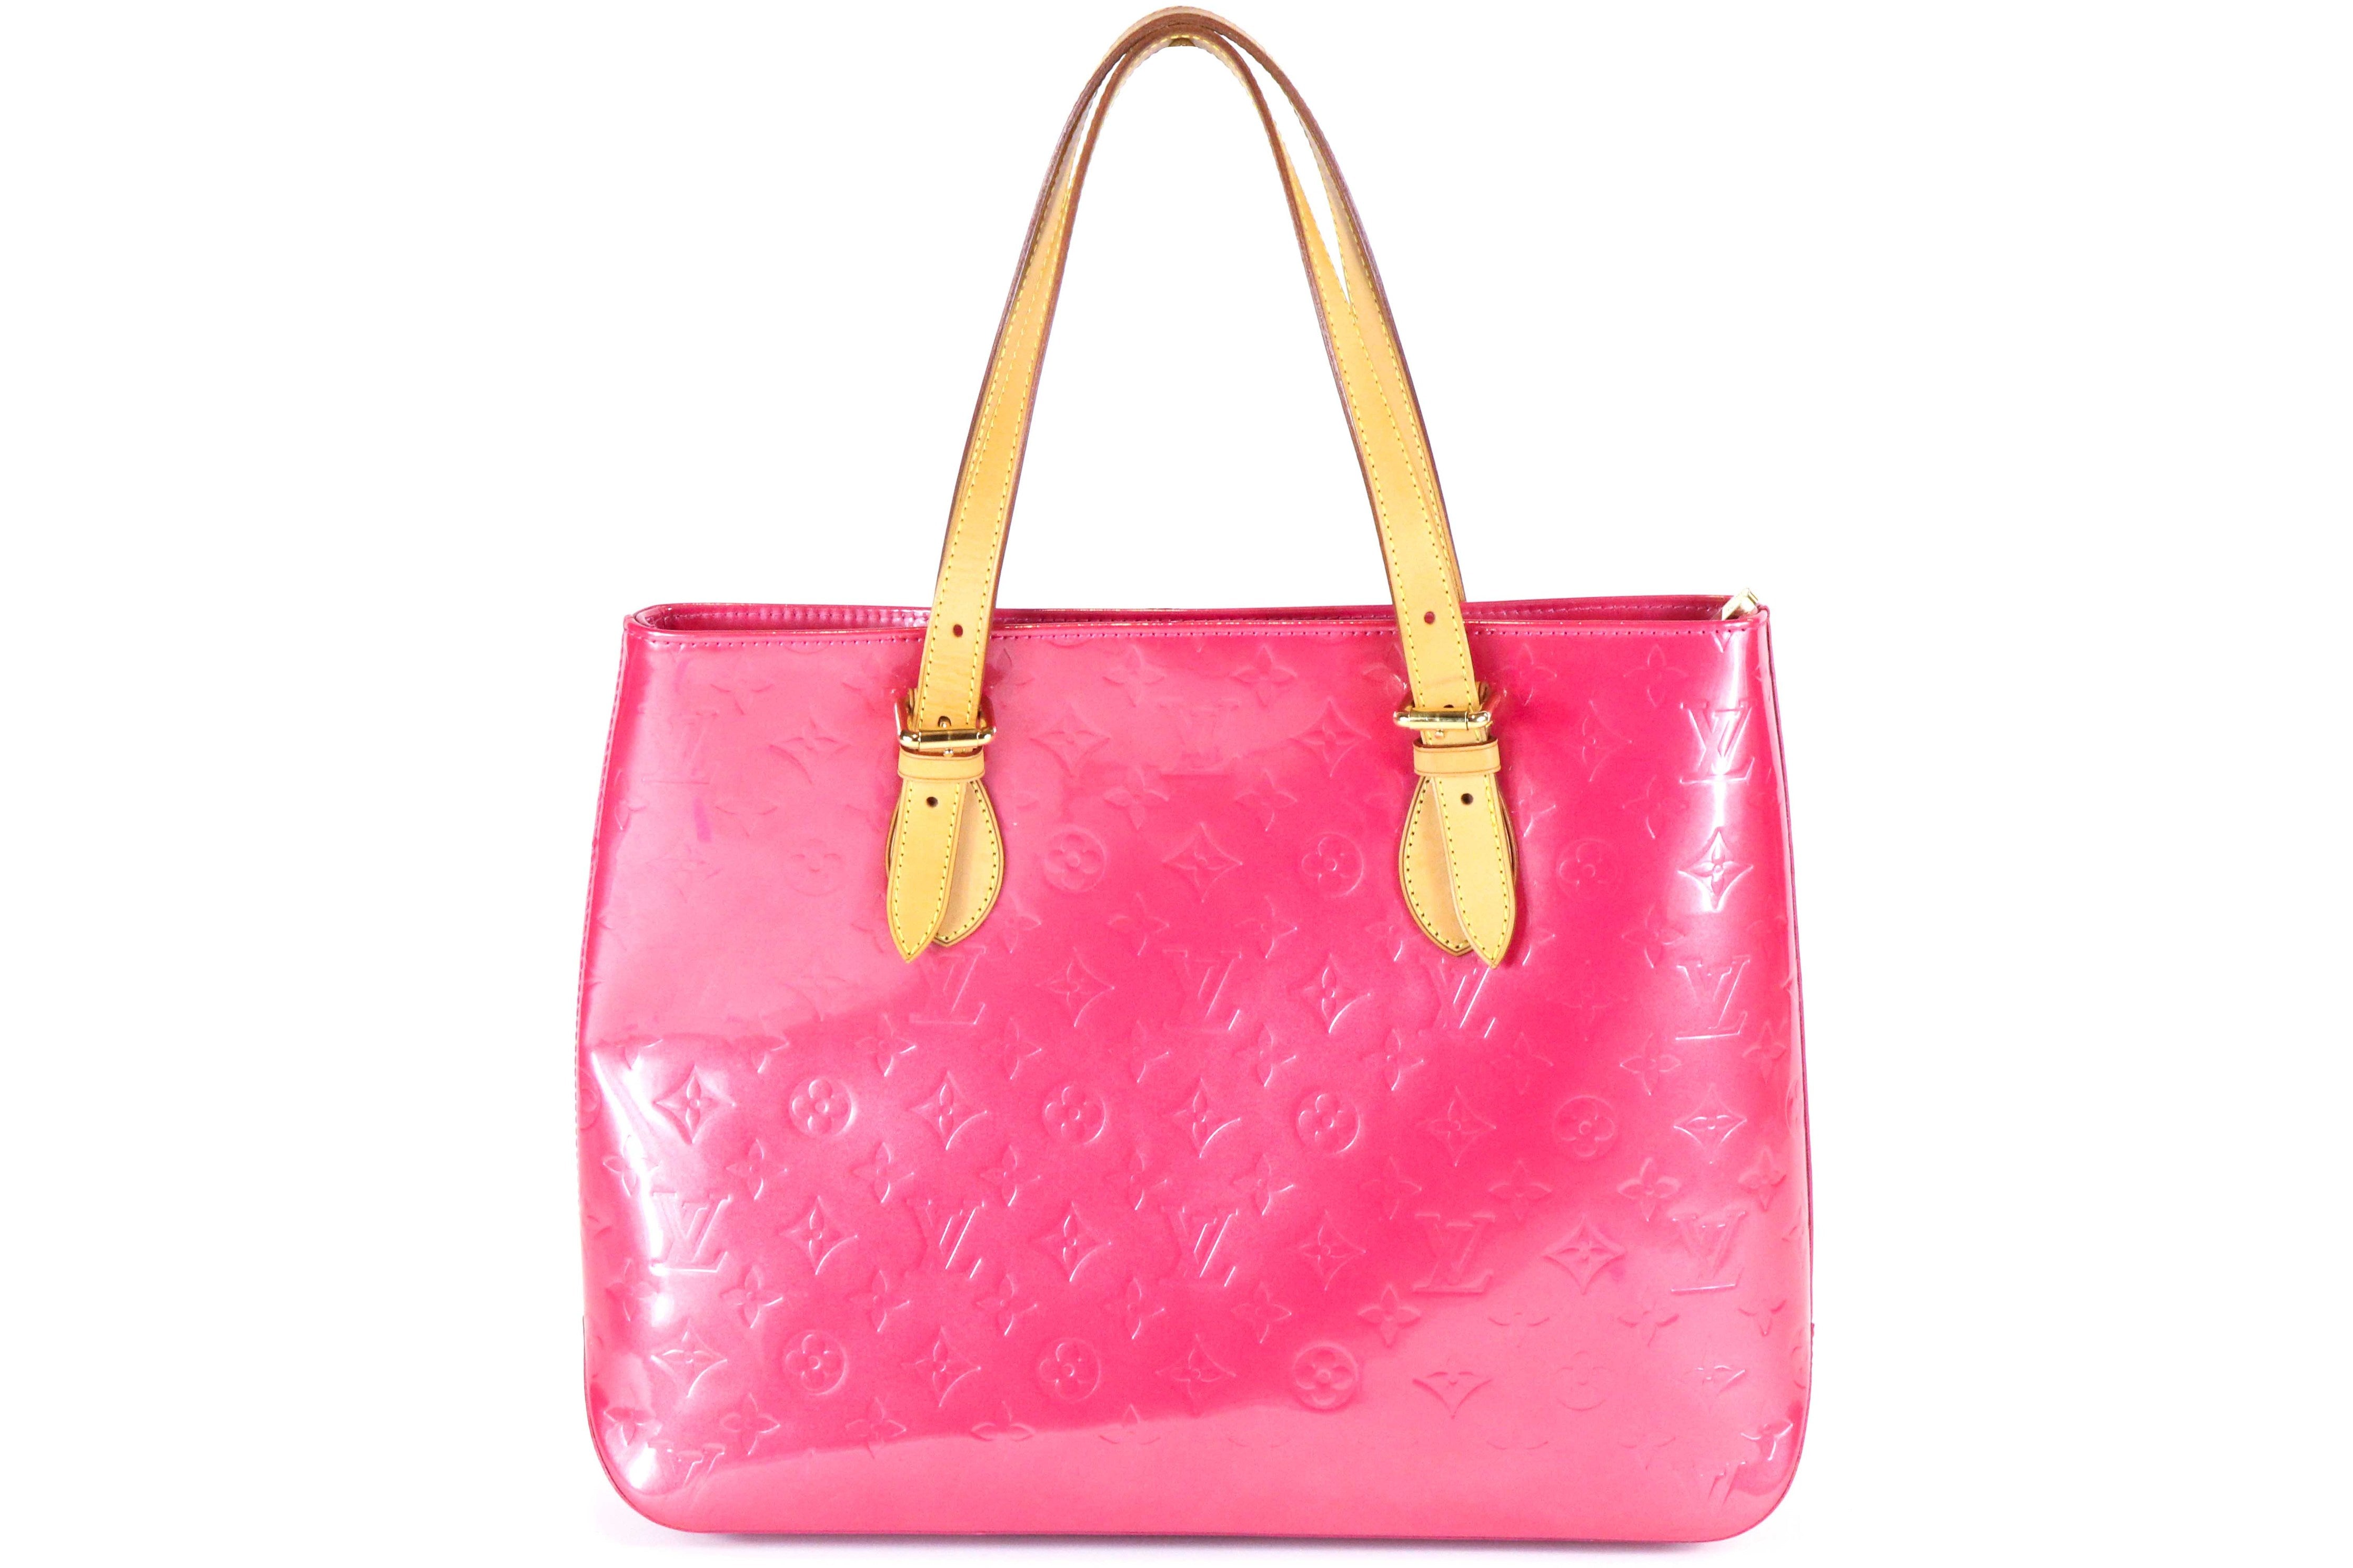 LOUIS VUITTON Vernis Brentwood Pink 1222140